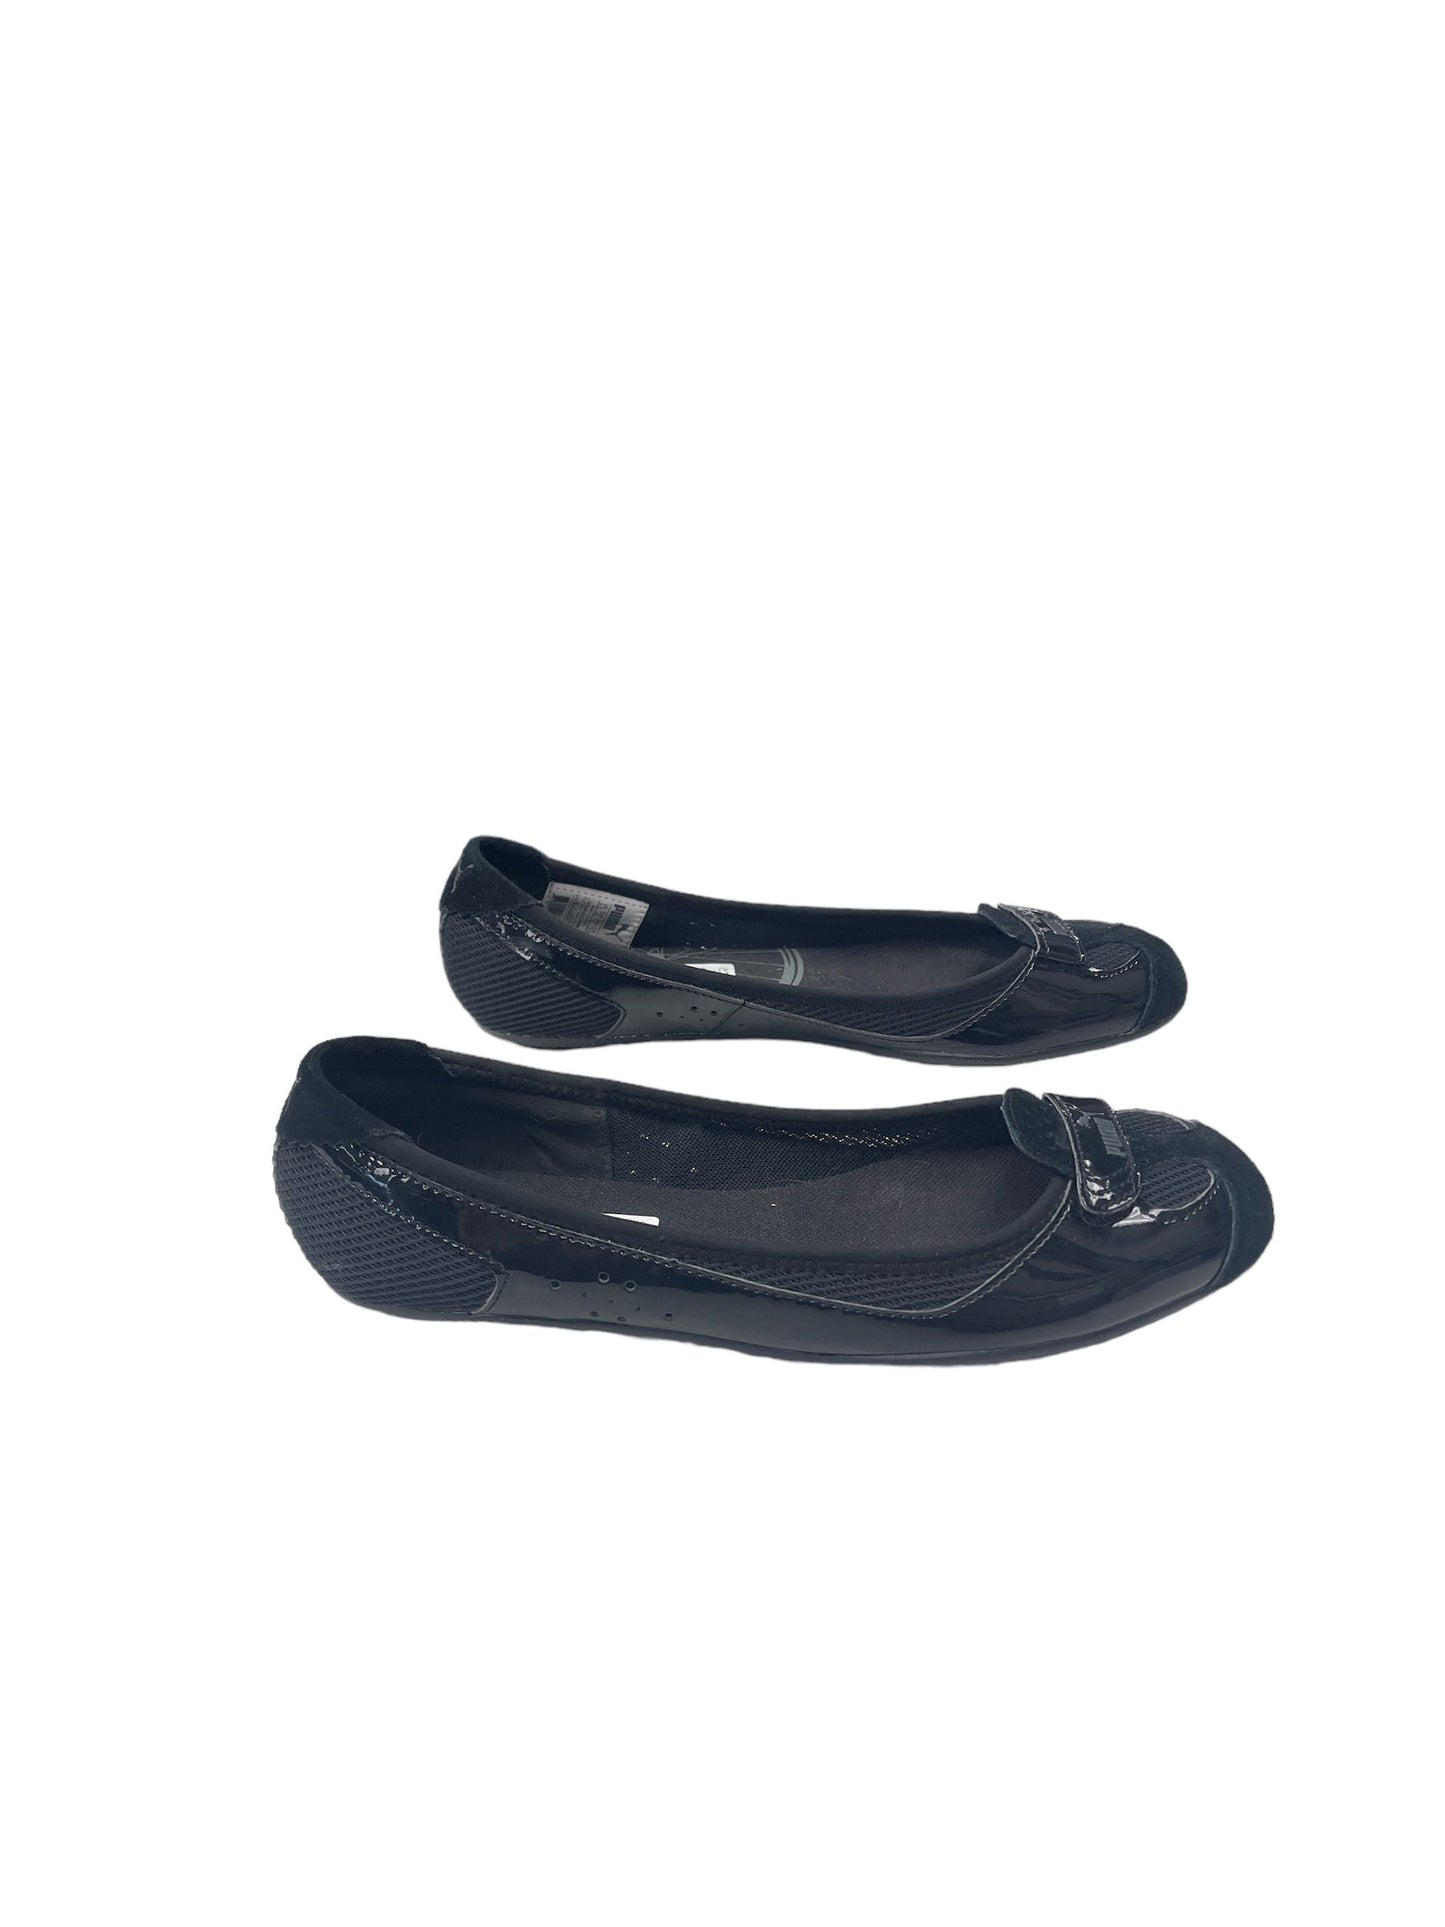 Shoes Flats By Puma  Size: 9